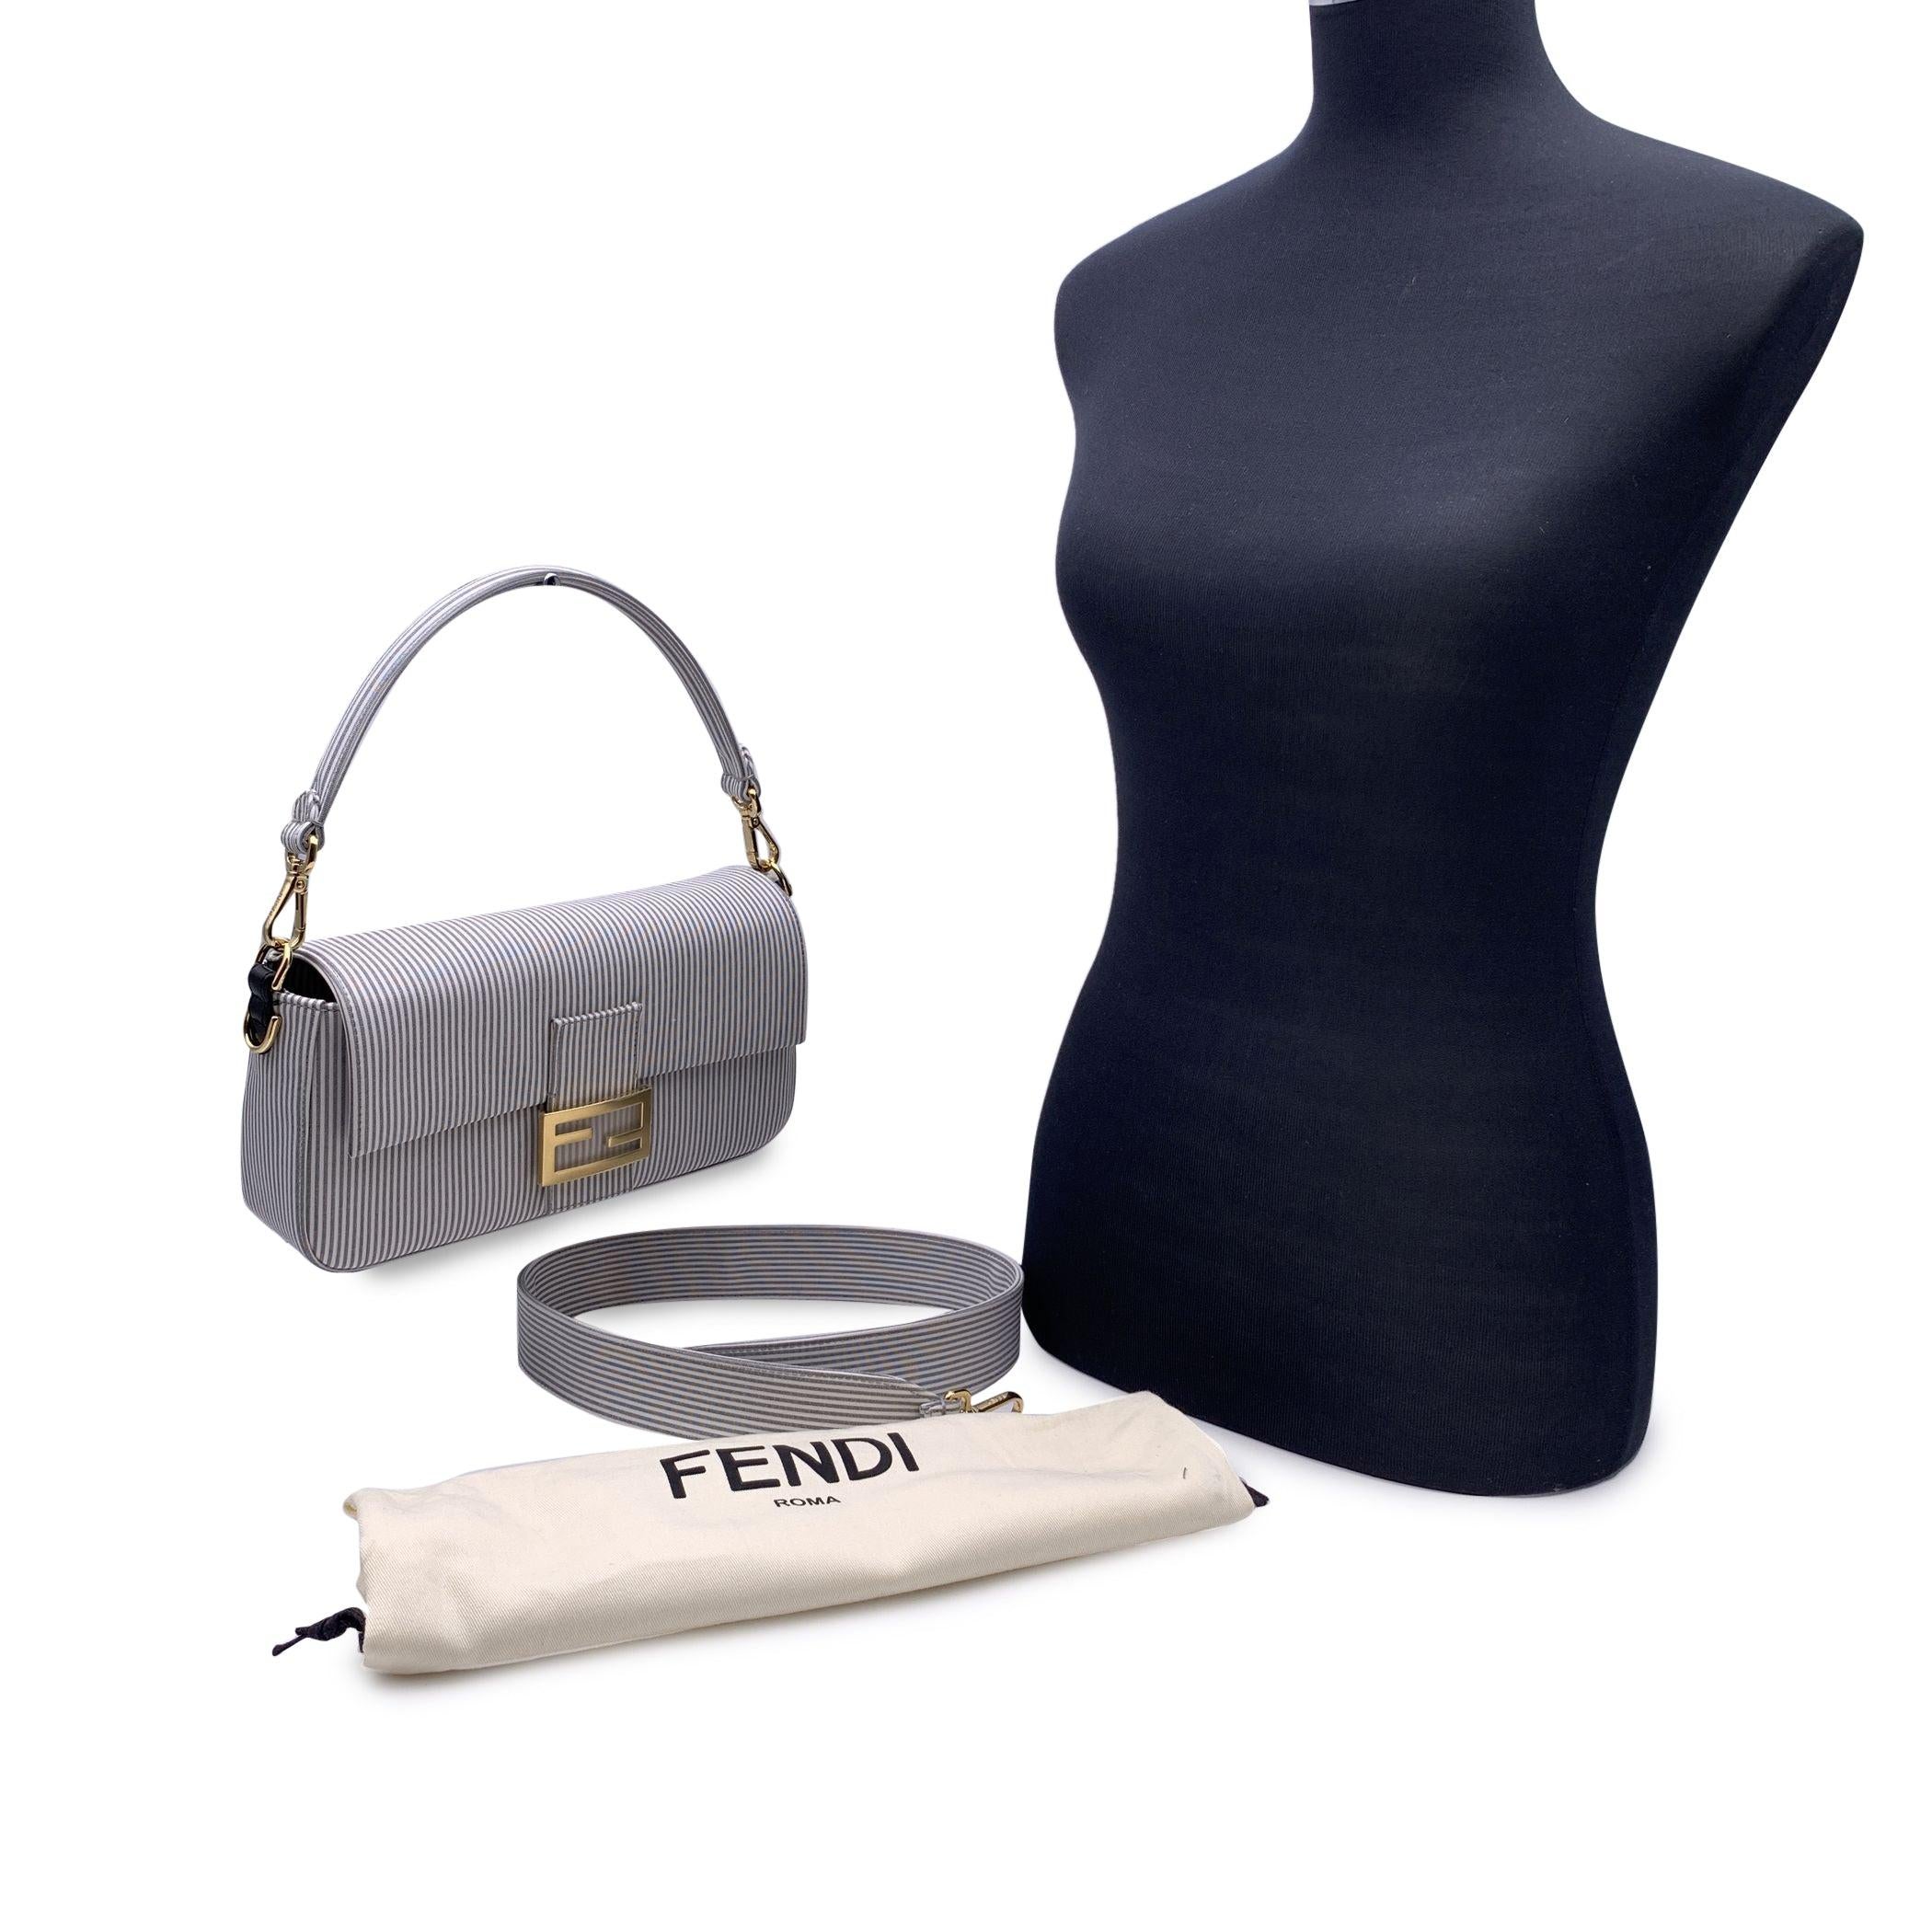 This beautiful Bag will come with a Certificate of Authenticity provided by Entrupy, The certificate will be provided at no further cost. Gorgeous FENDI 'Bretagna Baguette' bag in striped cotton in grey and white with black leather trim . A simple